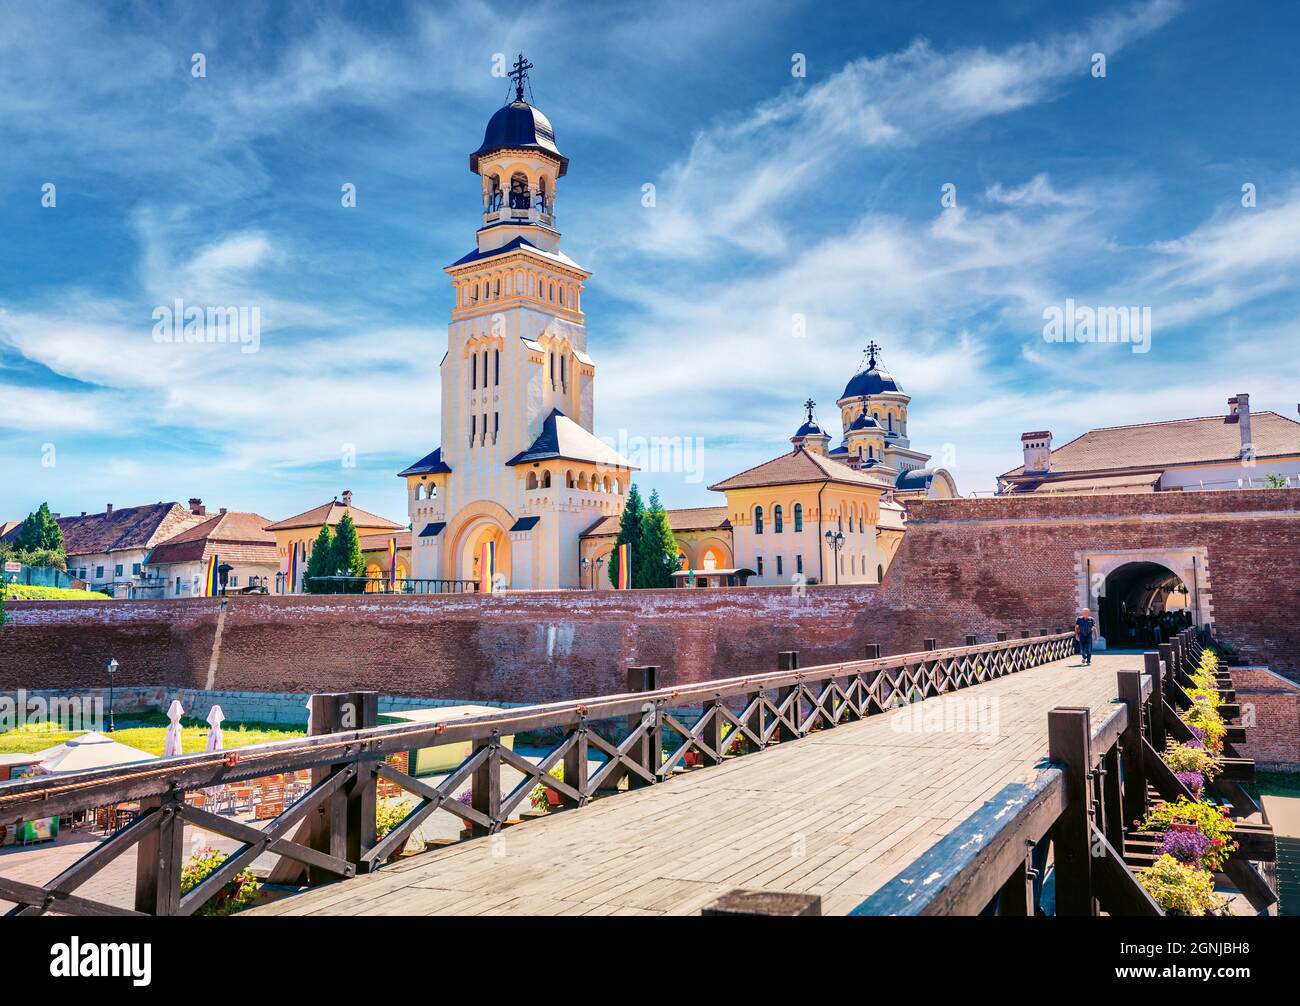 Sunny morning view of bell tower of Reunification Cathedral, Fortified churches inside Alba Carolina Fortress. Stunning summer cityscape of Alba Iulia Stock Photo